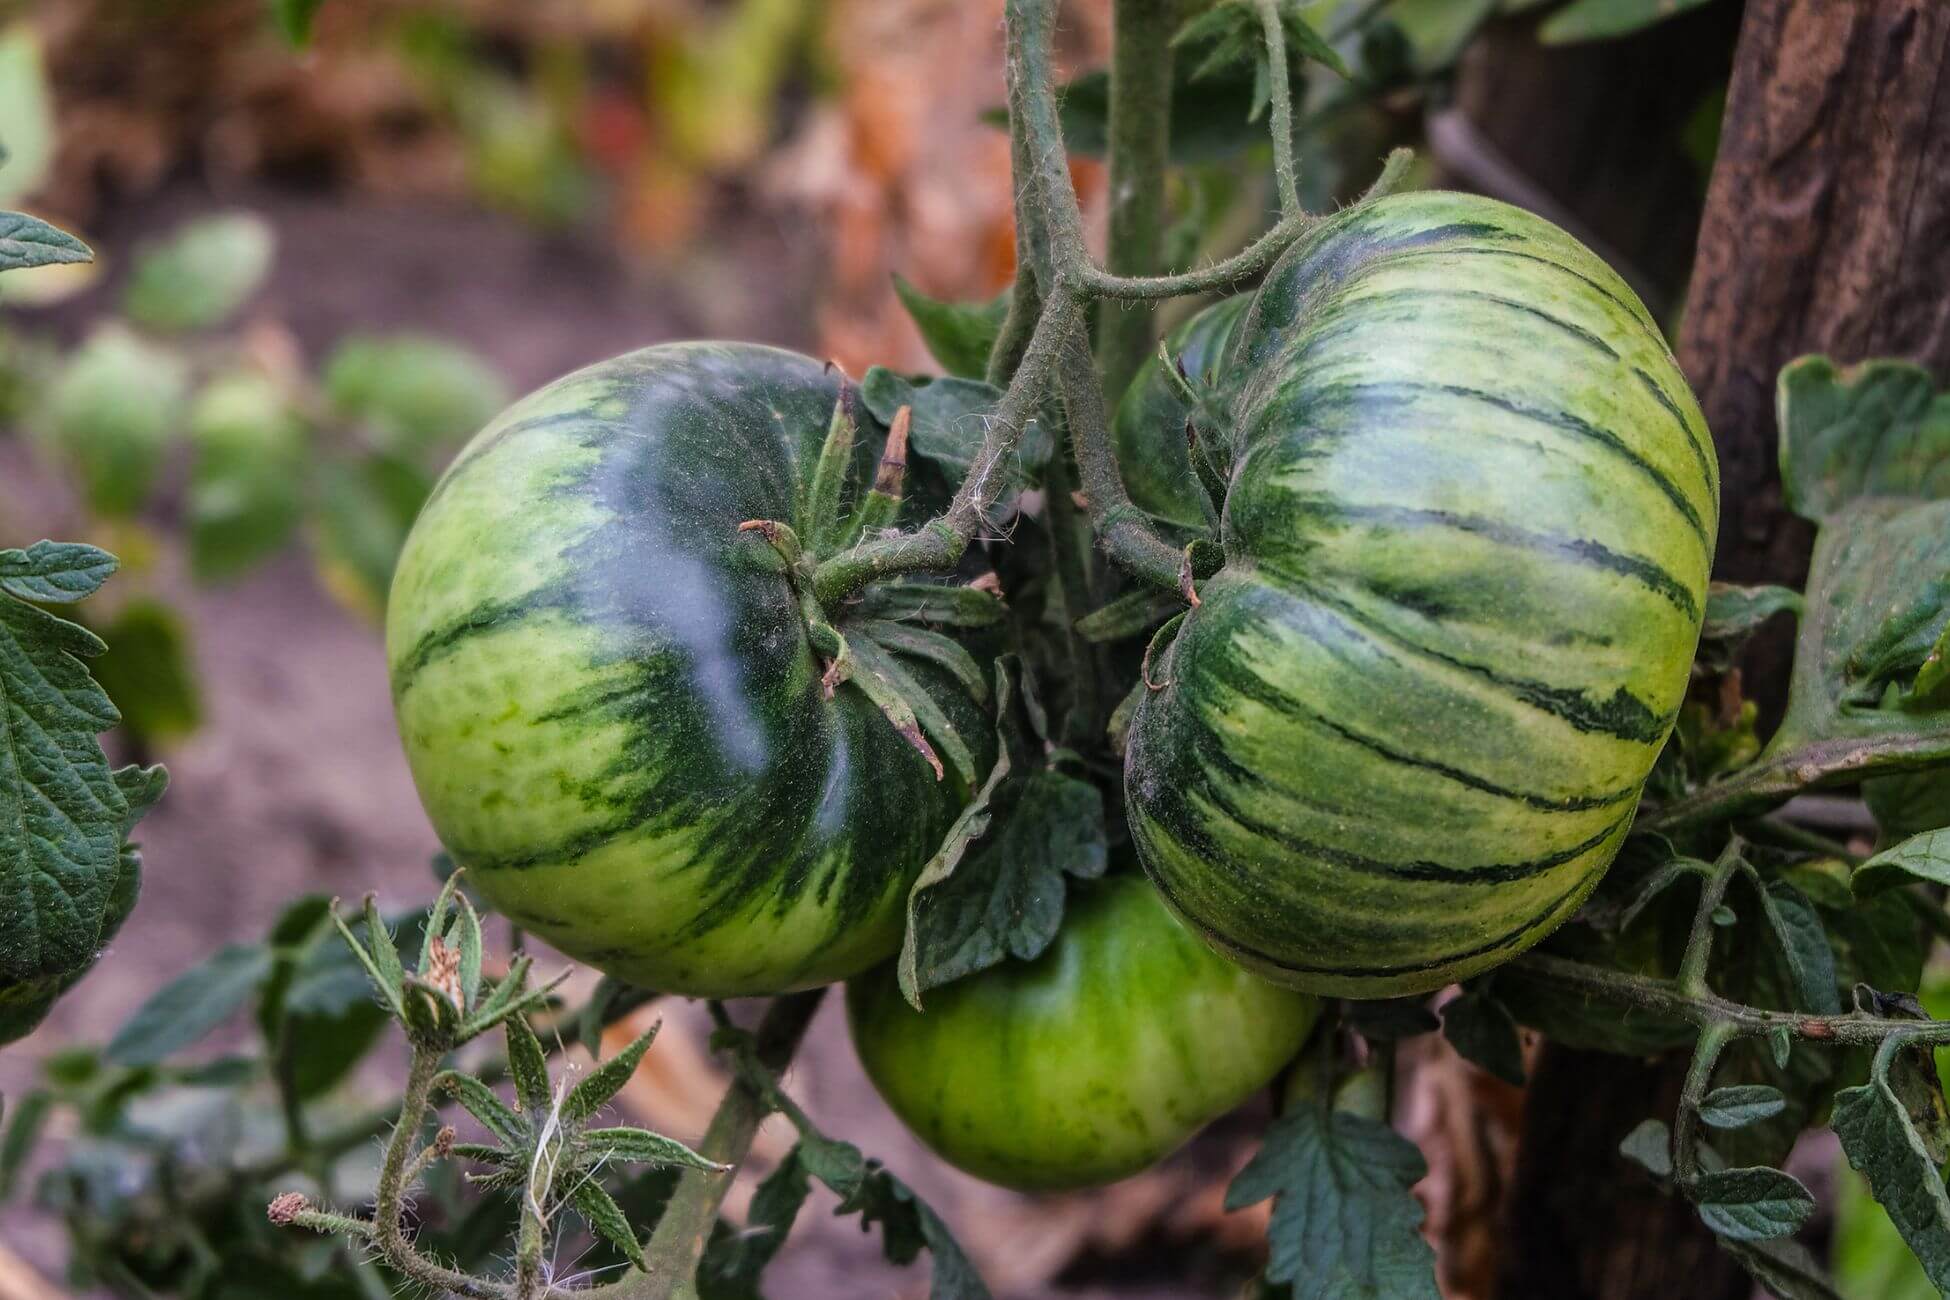 Close-up of Green Zebra open-pollinated tomatoes on the vine, featuring dark and light green stripes amid lush foliage.